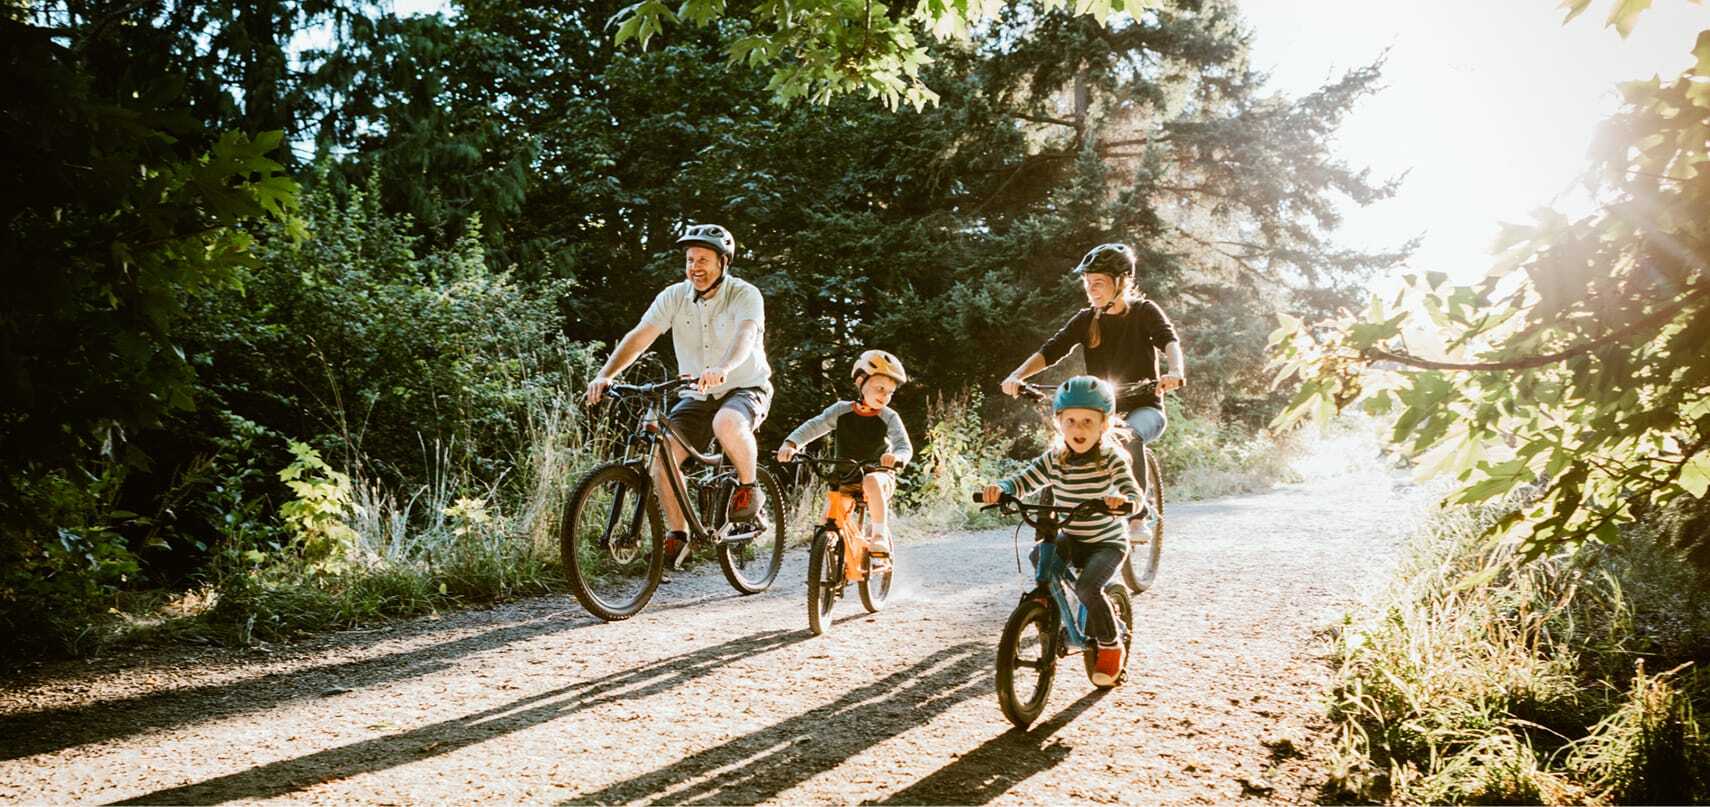 A family taking a bike ride together